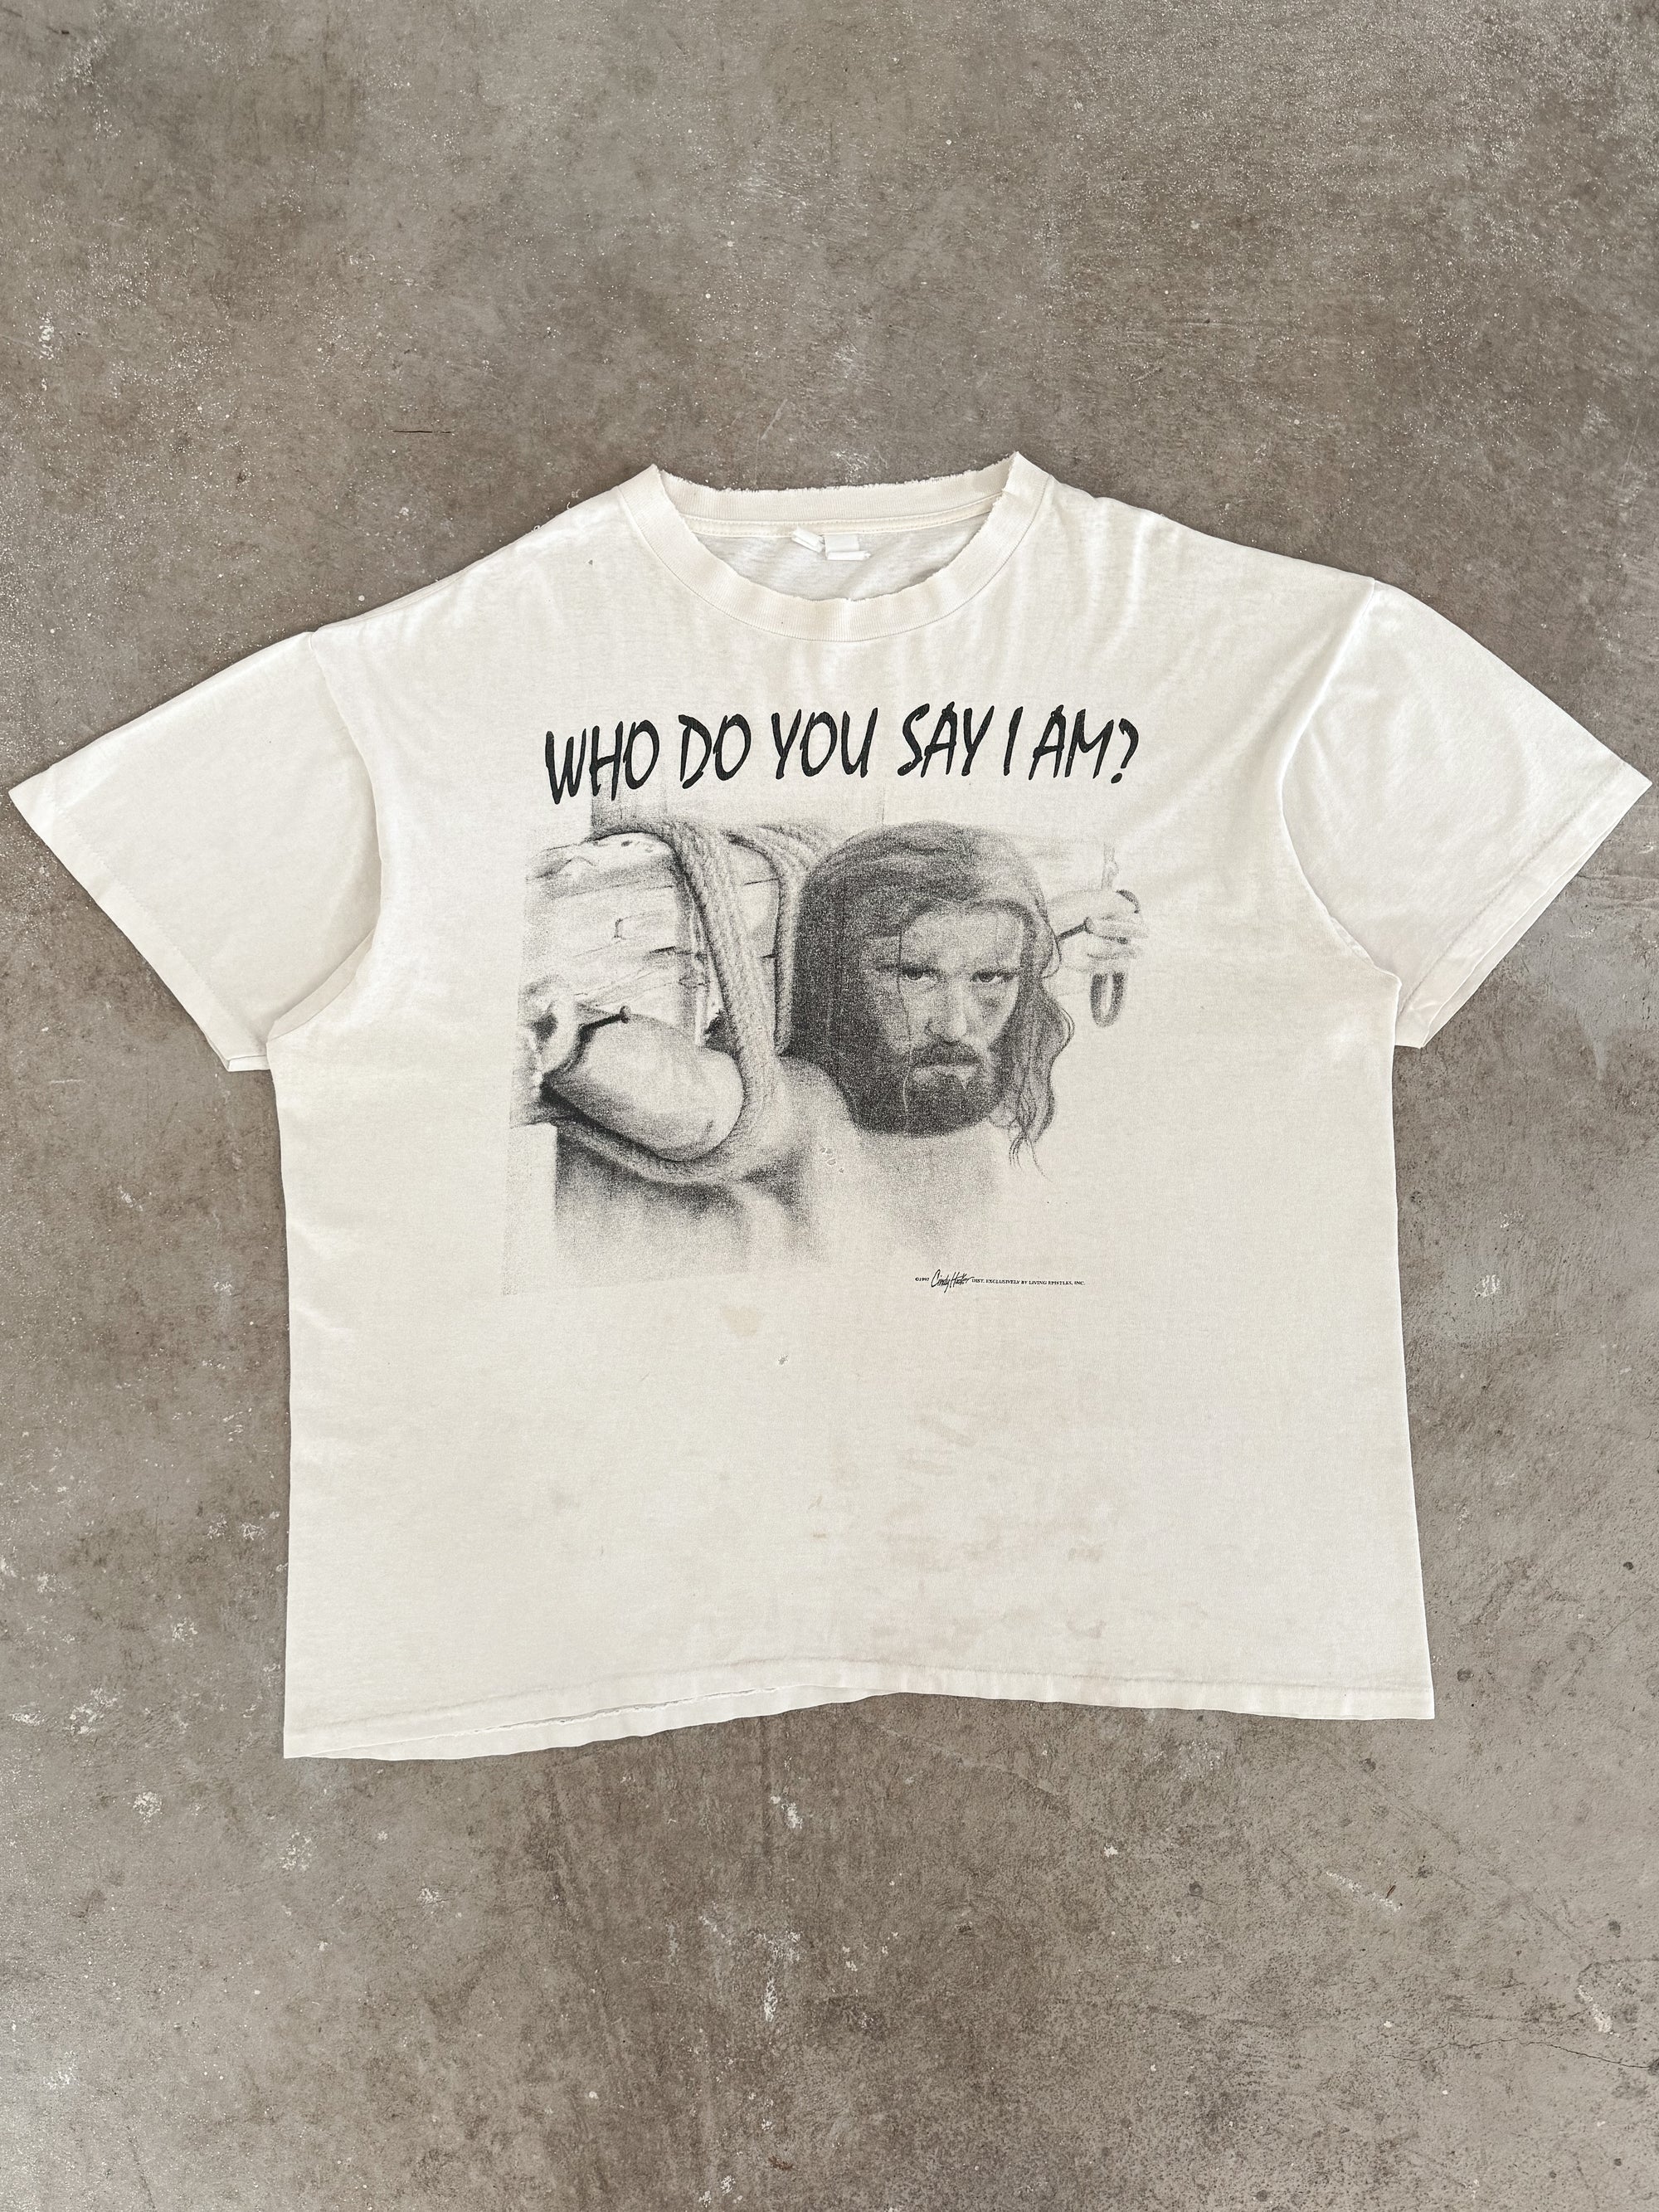 1990s "Who Do You Say I Am?" Distressed Tee (XXL)